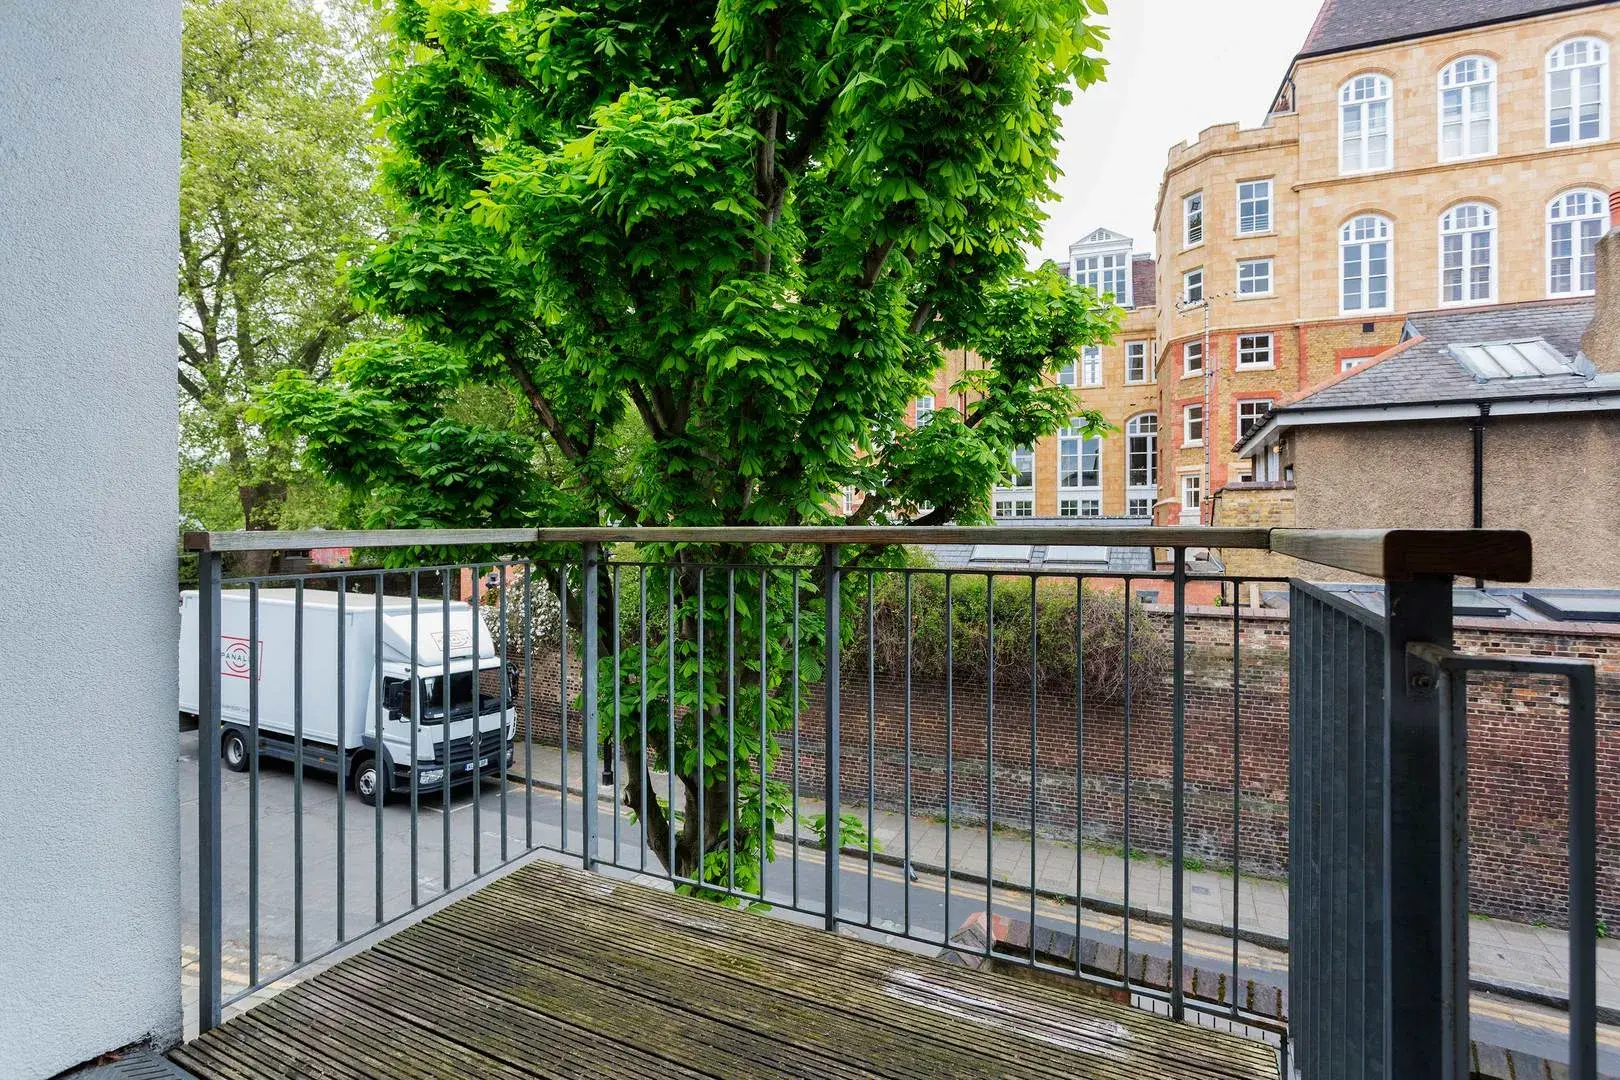 Bowling Green Lane, holiday home in Islington, London